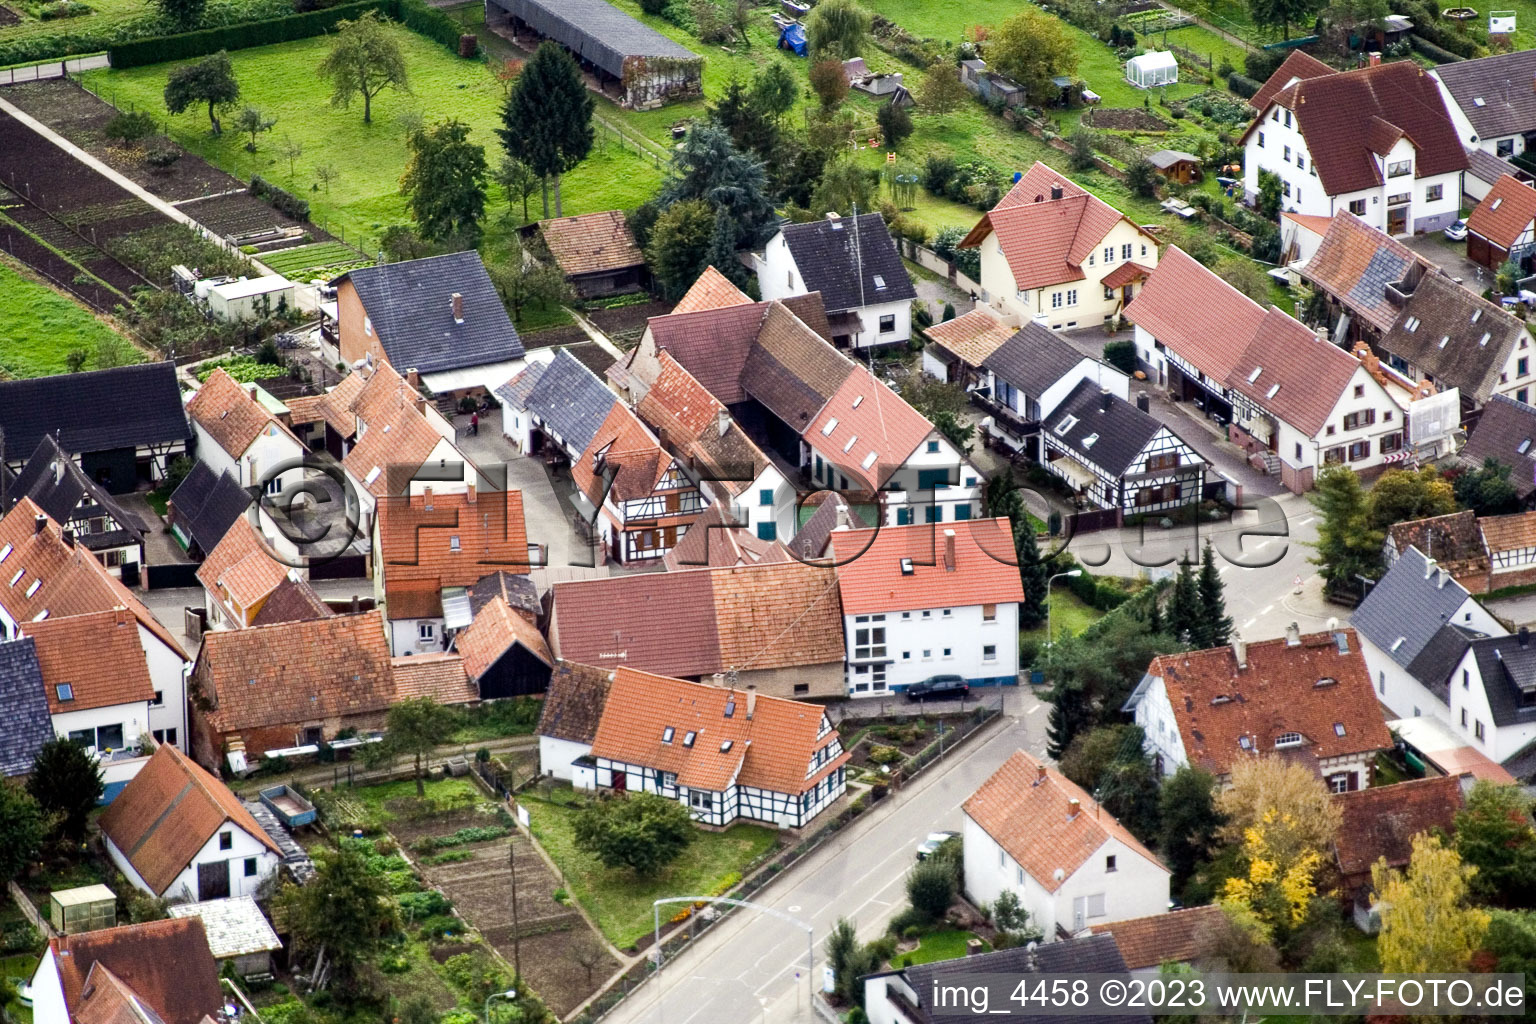 Gänsried in Freckenfeld in the state Rhineland-Palatinate, Germany from the drone perspective